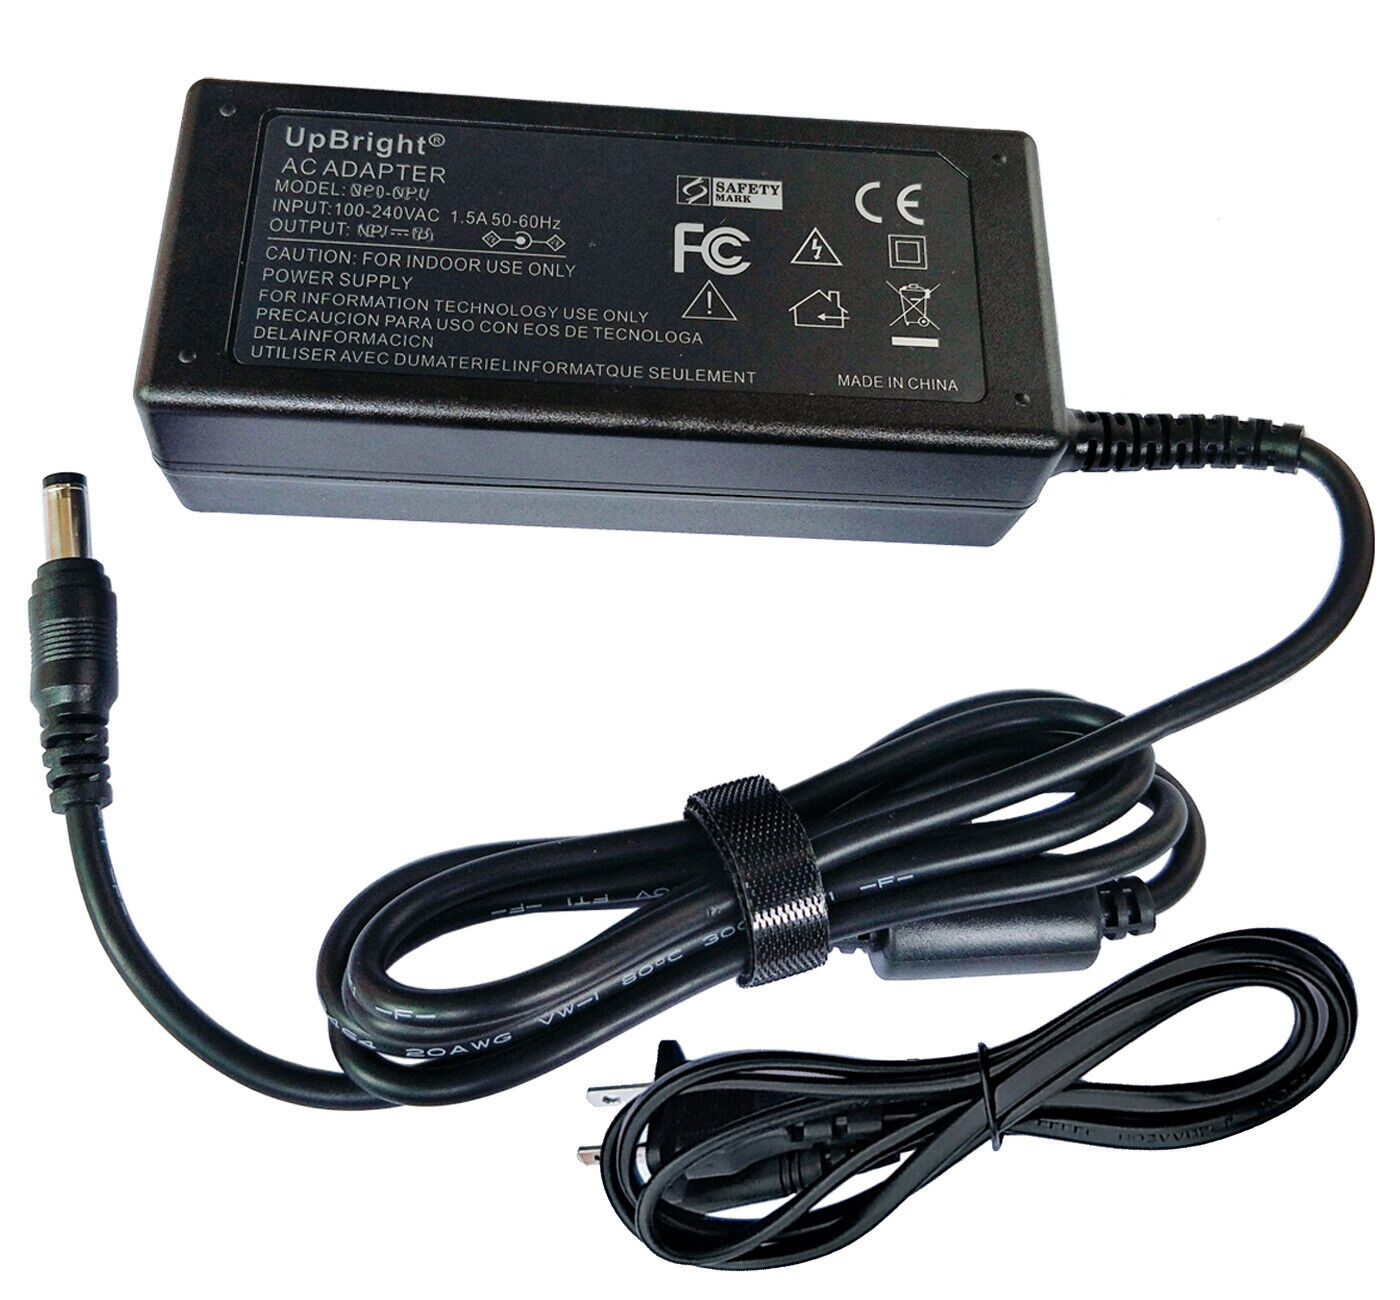 NEW AC Adapter For Kodak 730EX 1730795 Power Supply Cord Cable Charger Mains PSU